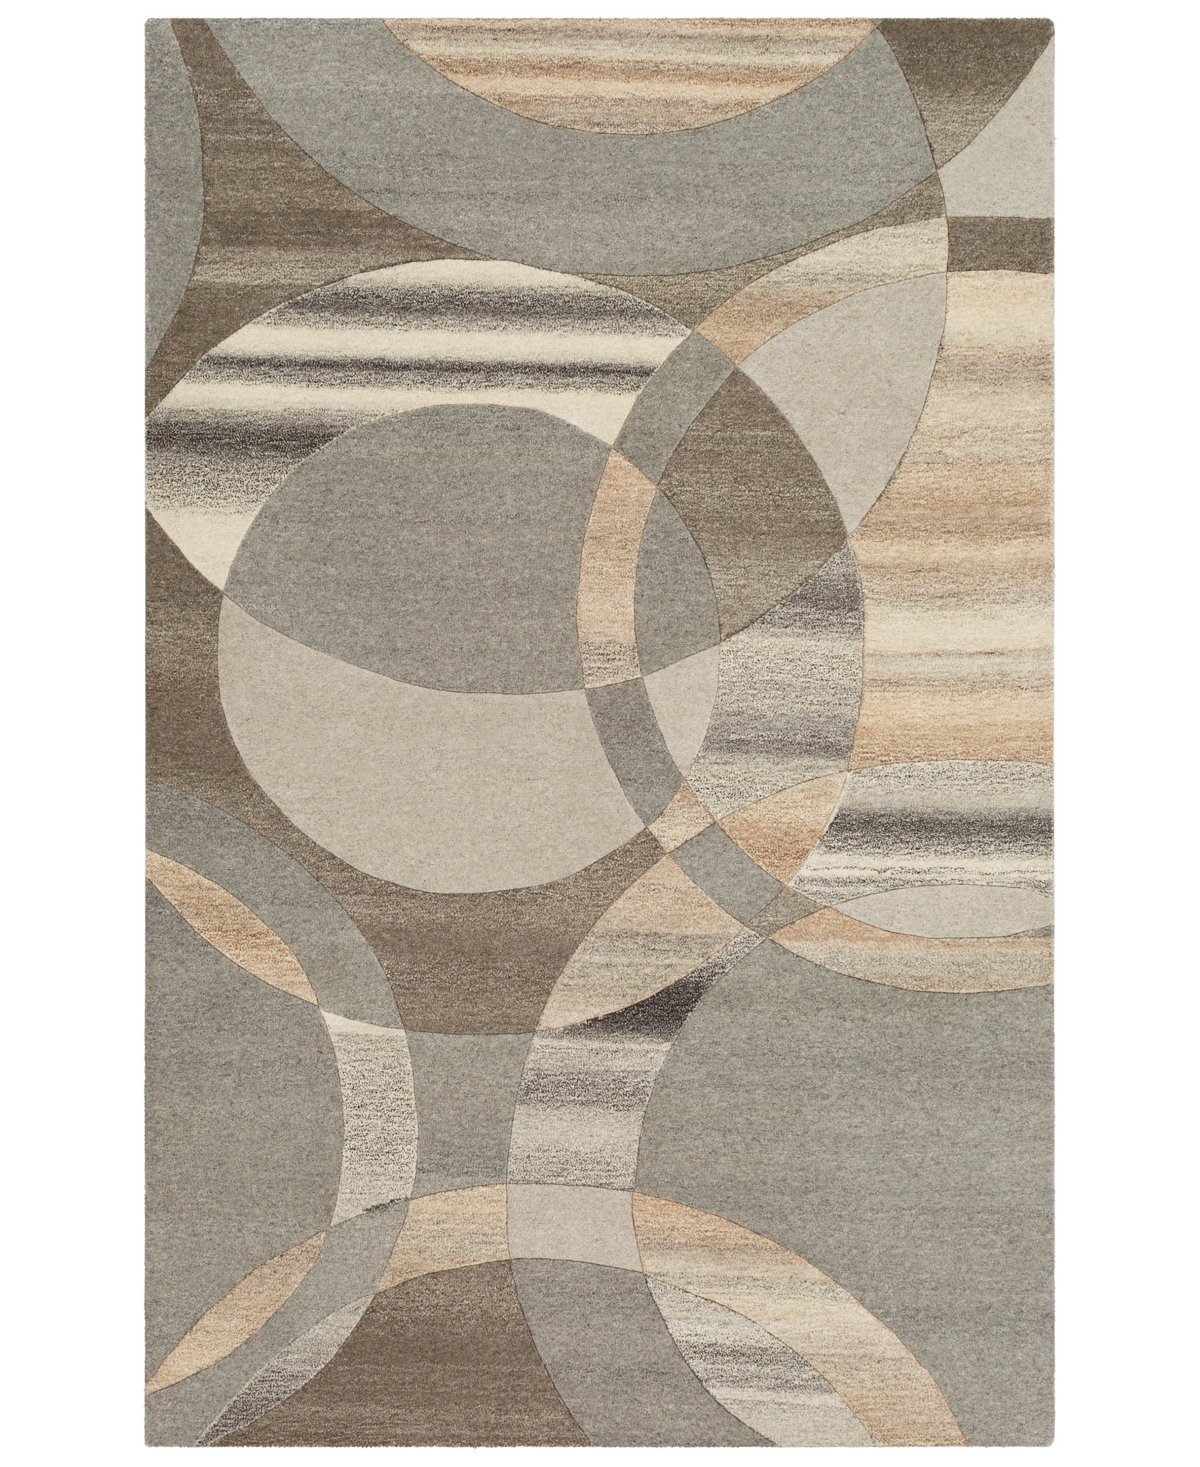 Surya Forum Fm-7210 7'6in x 9'6in Area Rug - Brown